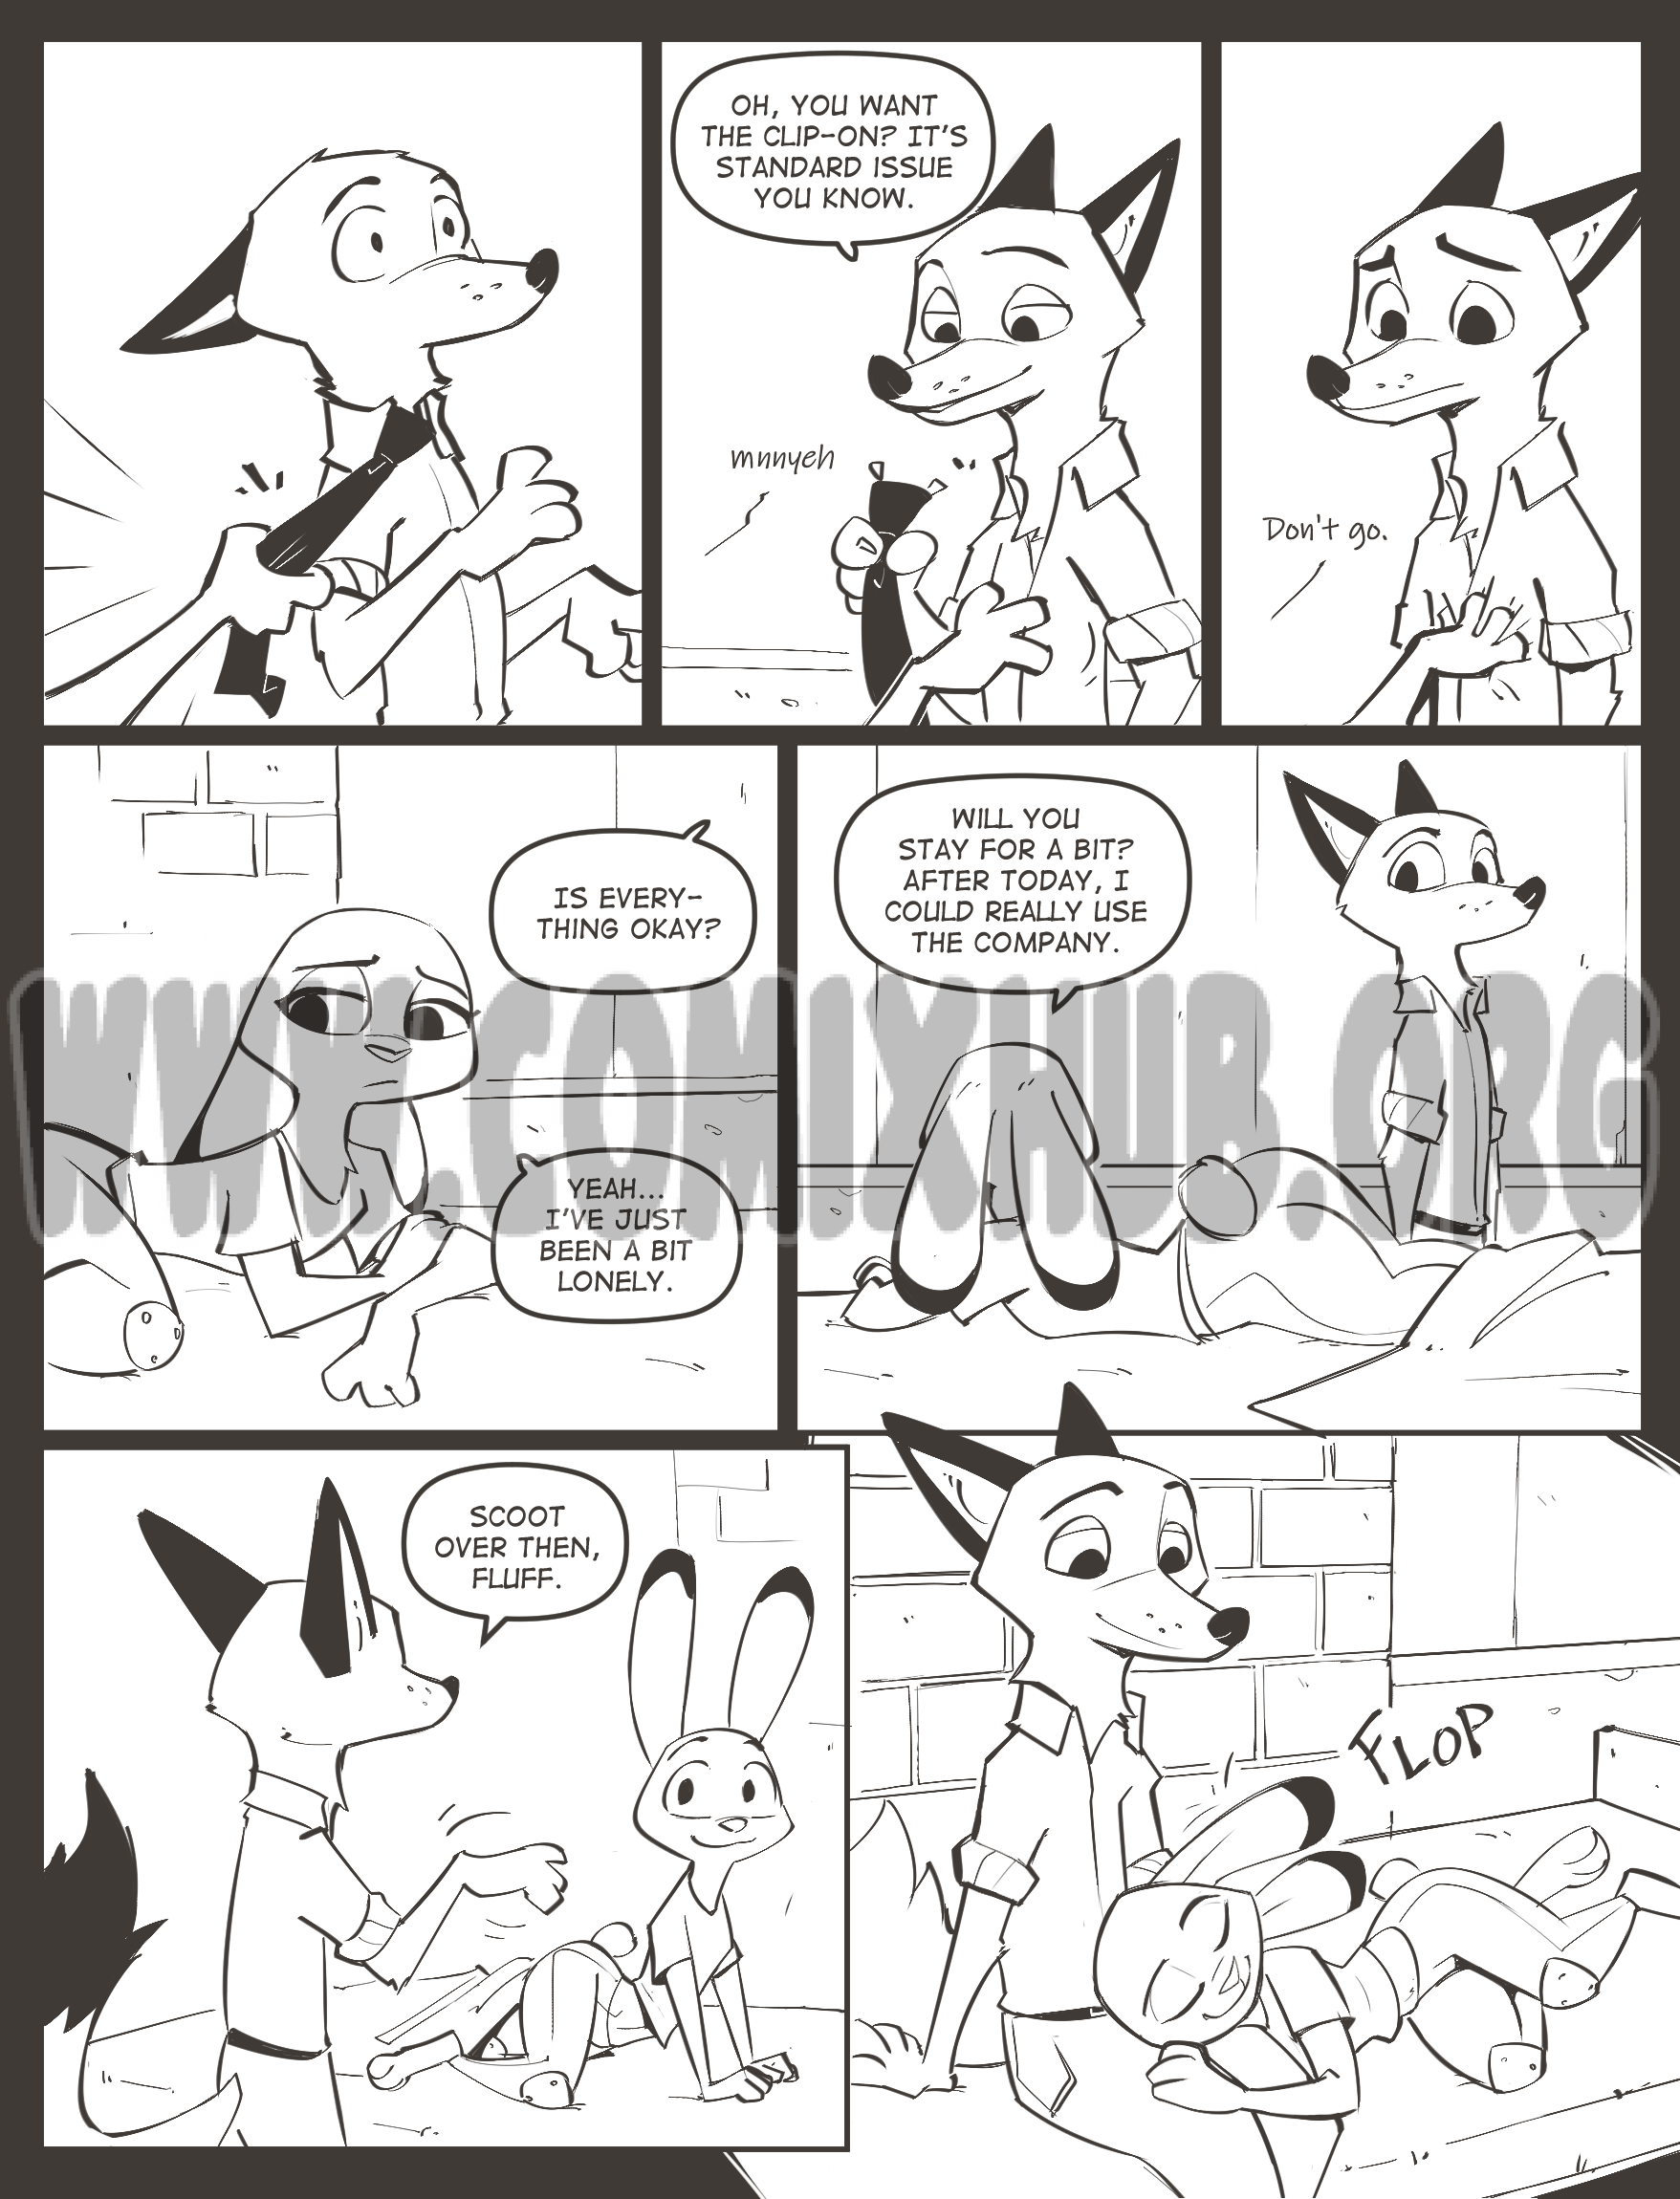 Tying The Knot porn comics Oral sex, cunnilingus, Furry, Straight